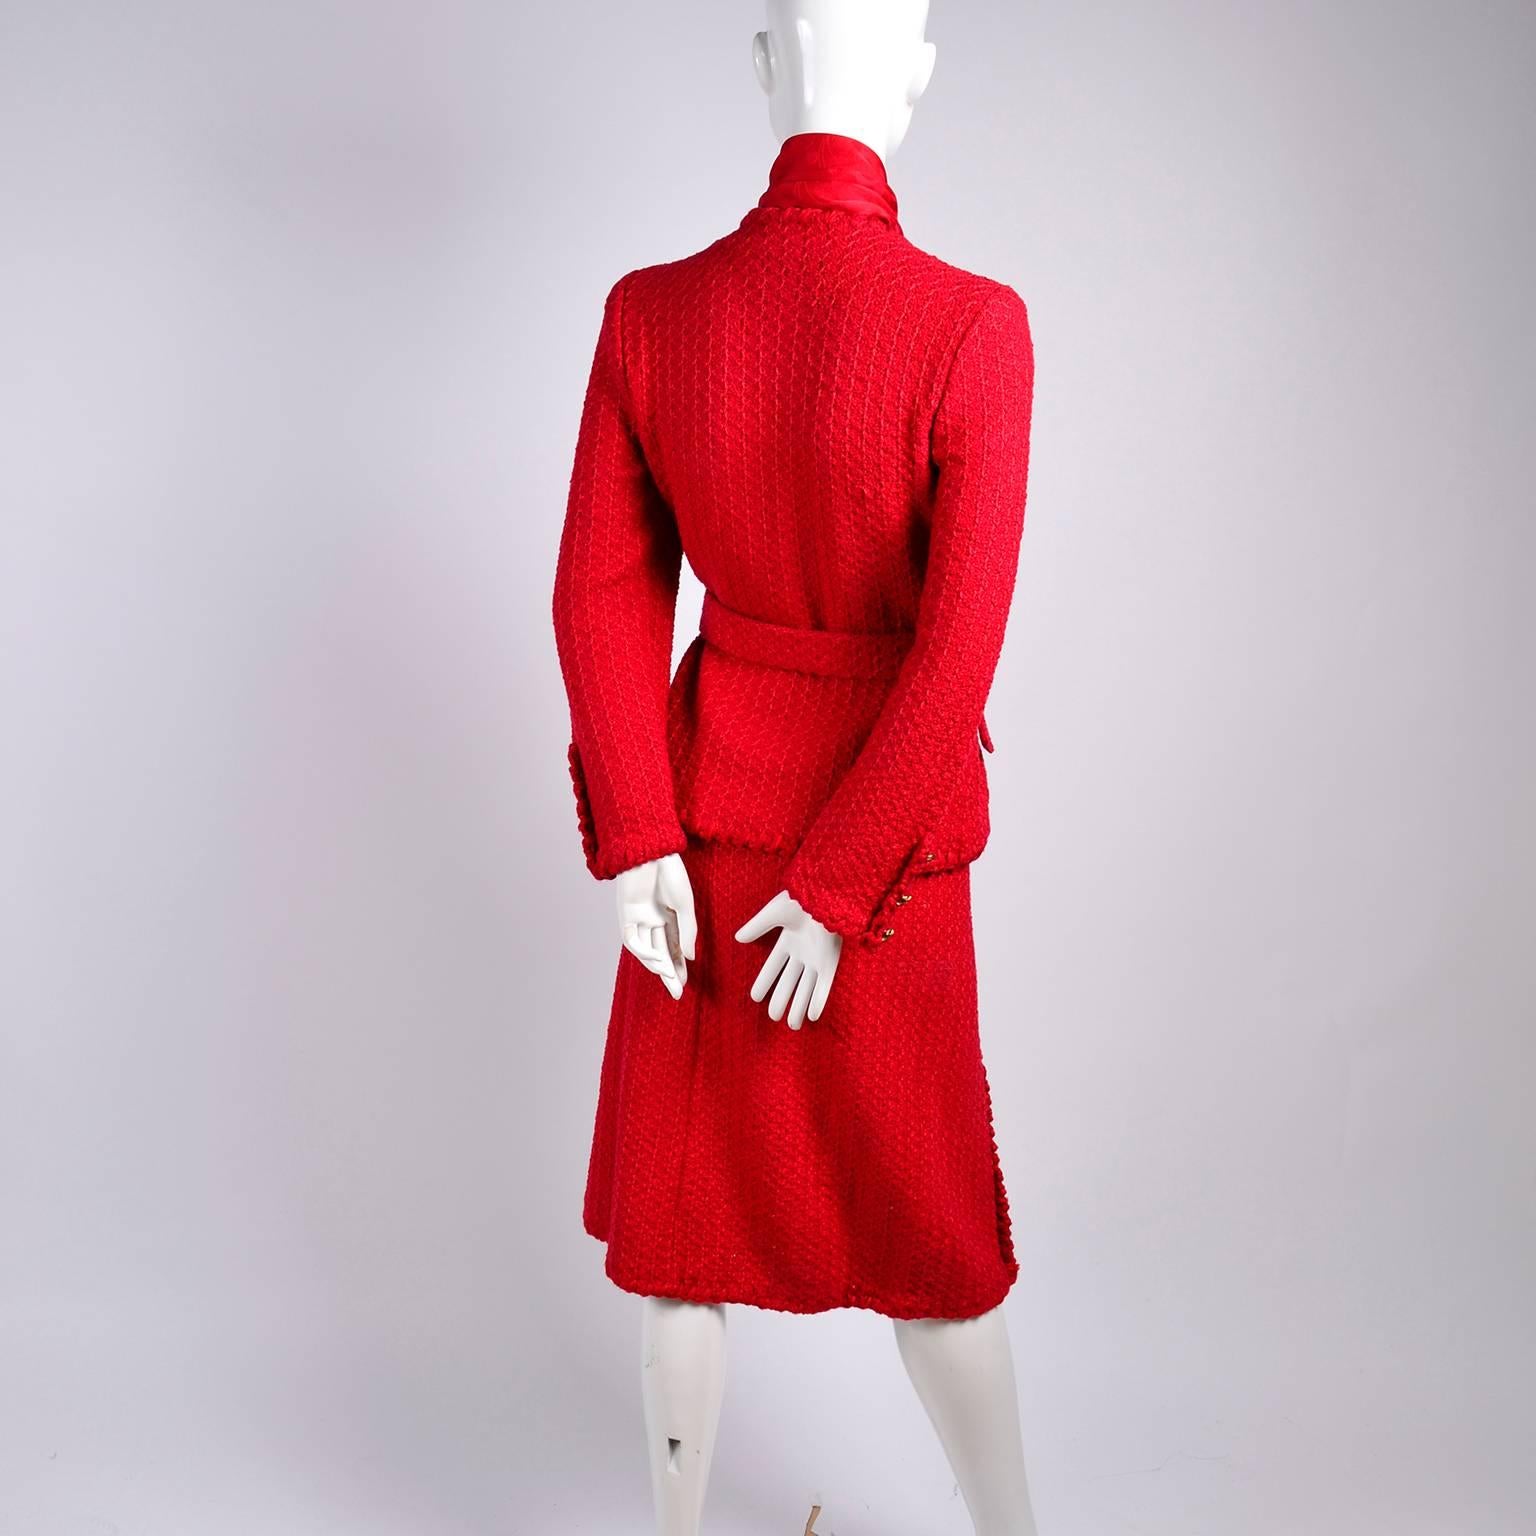 Vintage 1981 Adolfo Red Wool Skirt Suit Made Famous by First Lady Nancy Regan 2